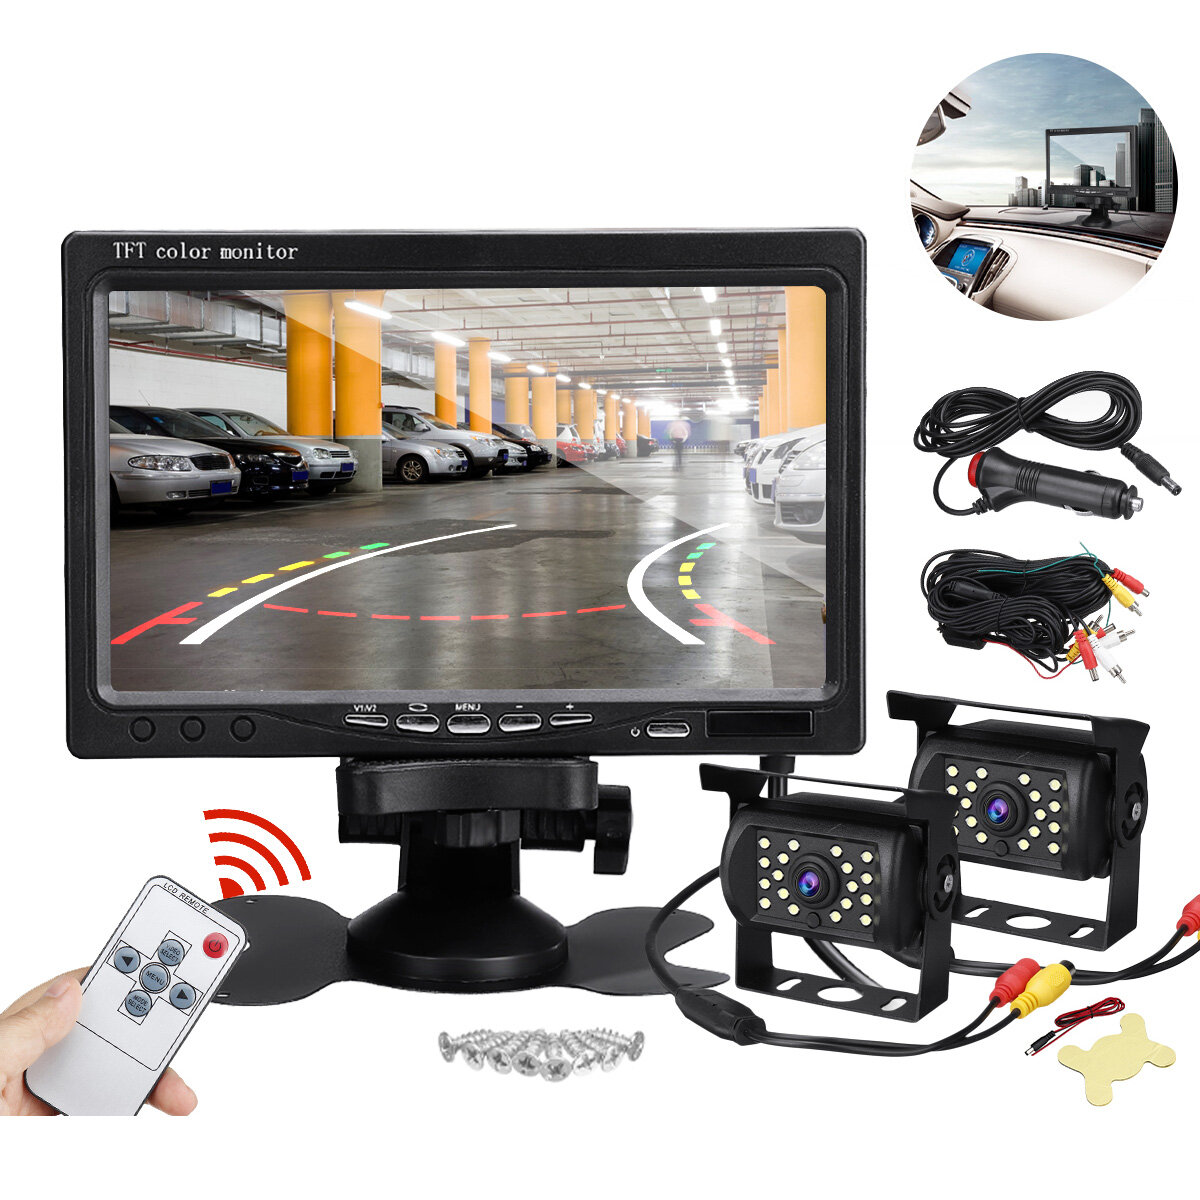 Image of 7'' LCD Monitor + Rear View Reverse Backup Camera For Truck Bus Lorry Caravan